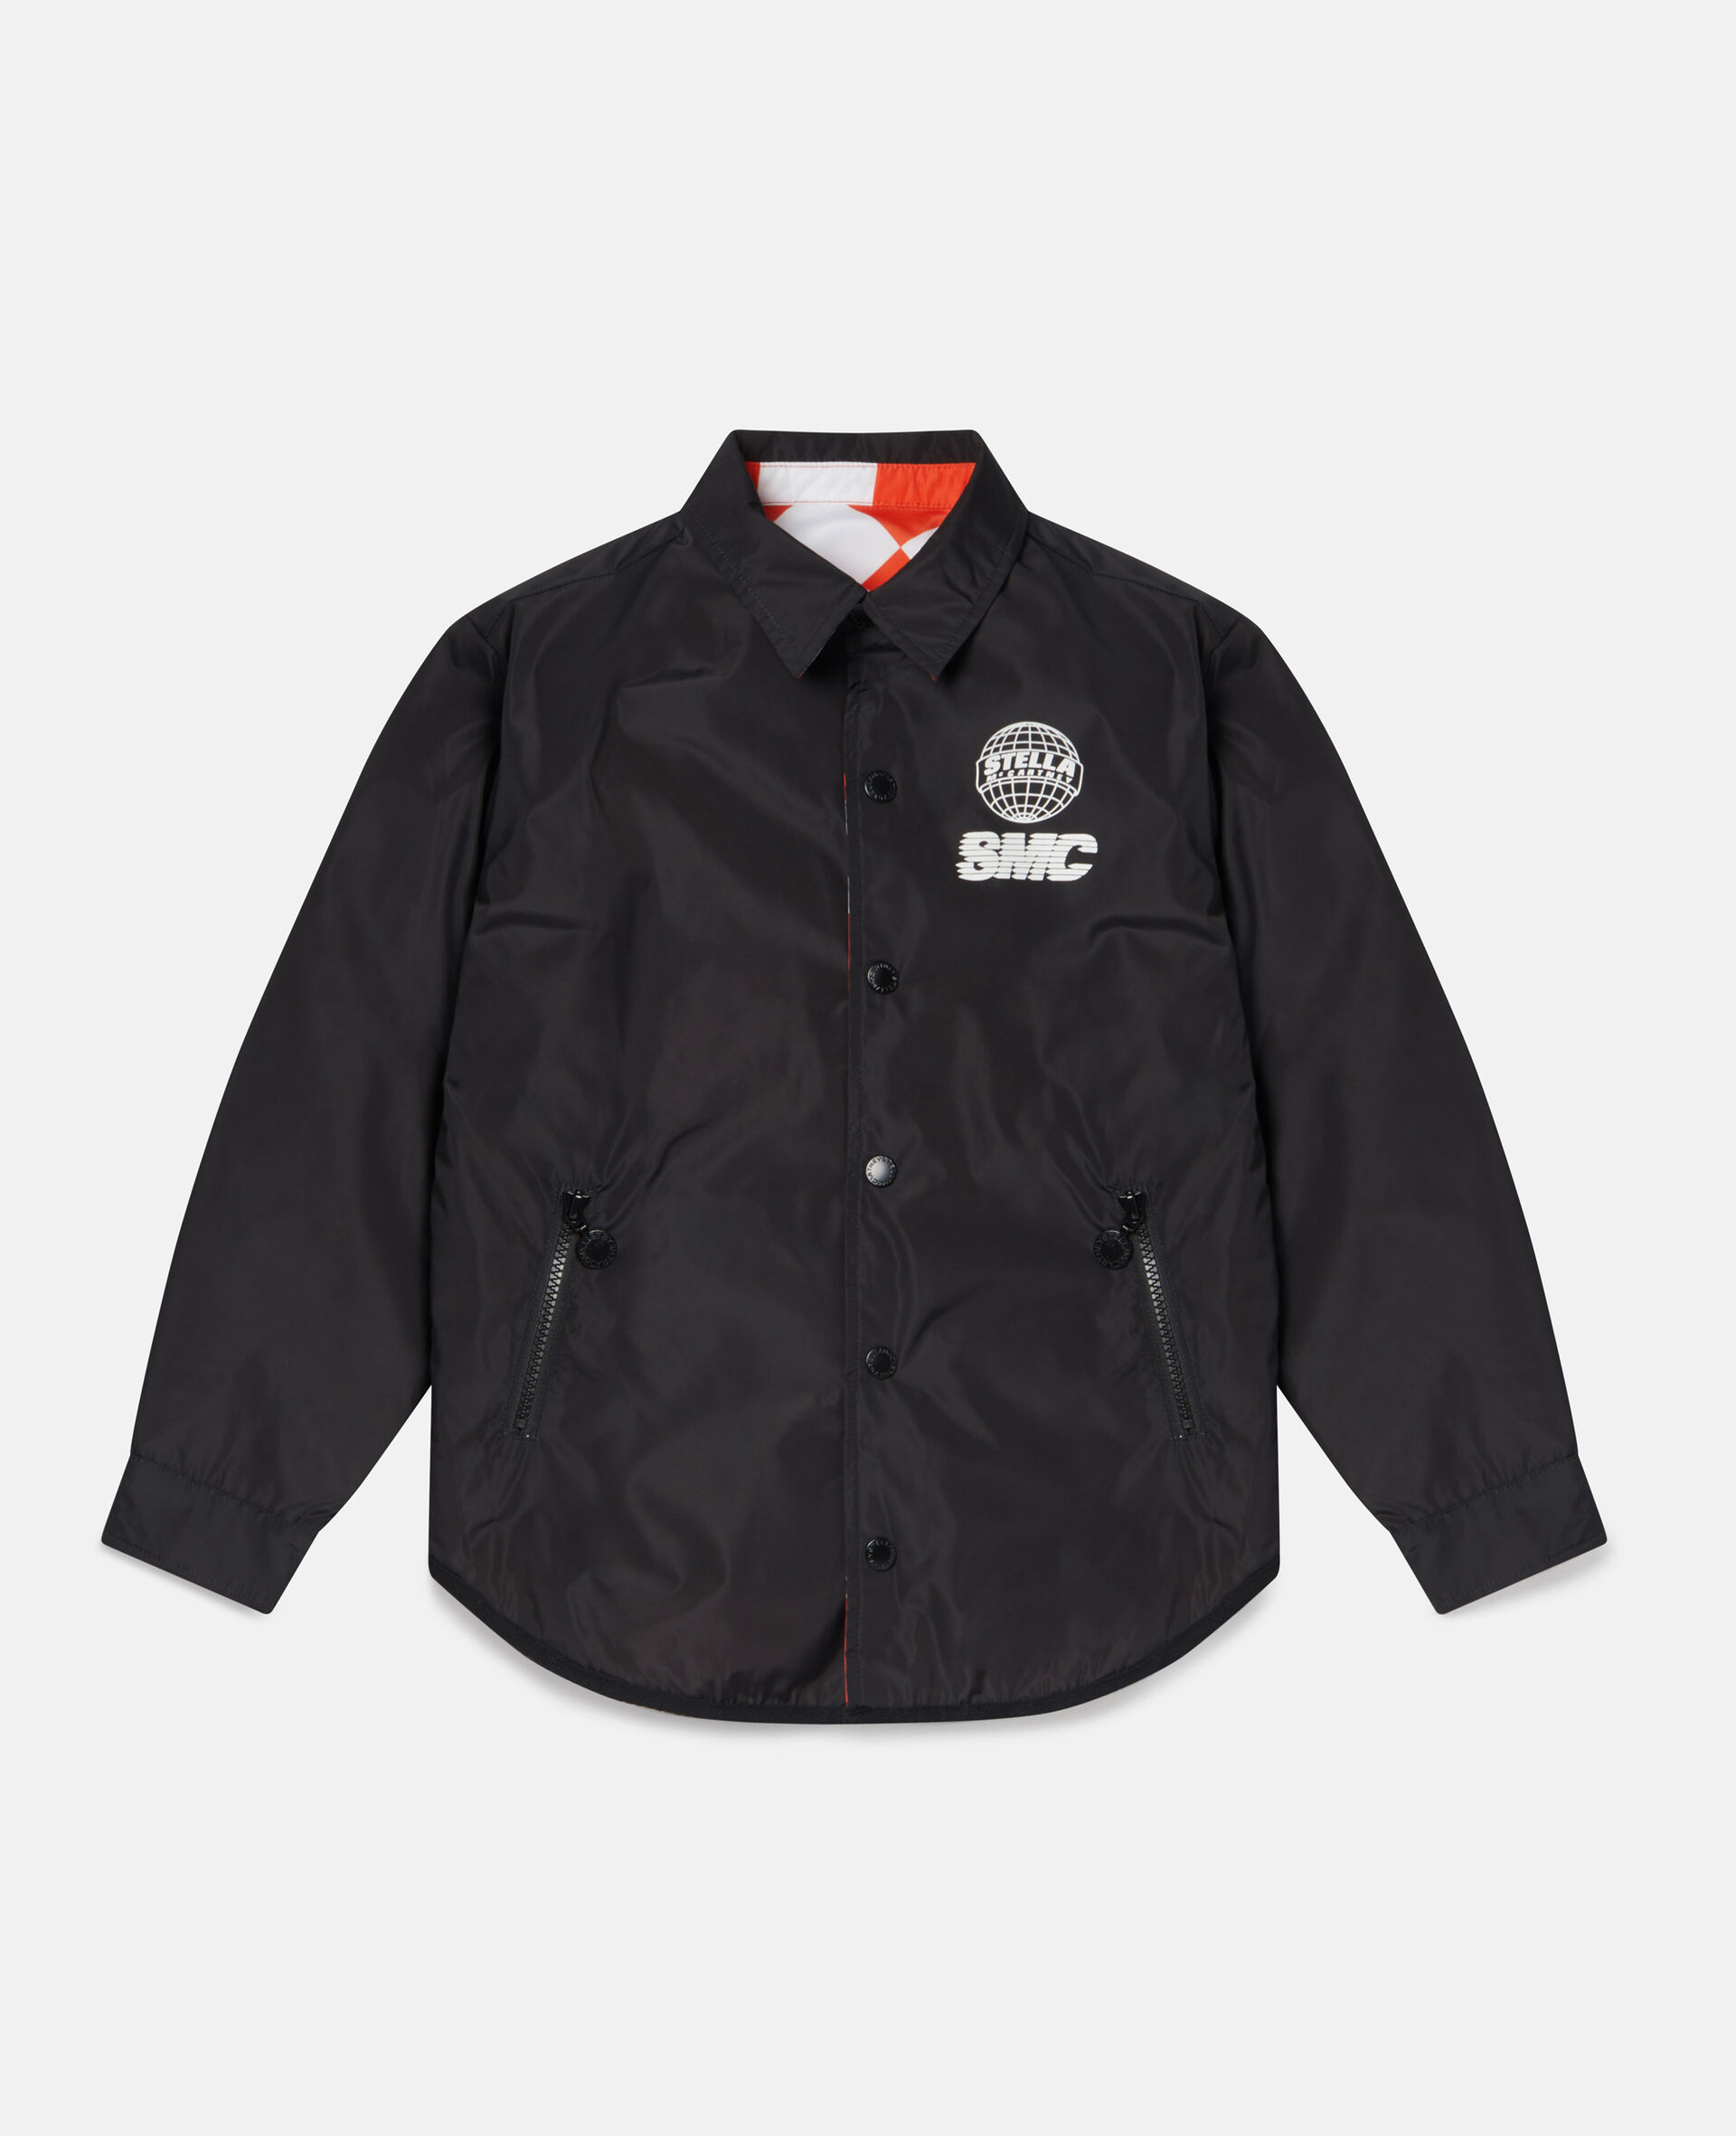 Reversible Chequerboard SMC Jacket-Black-large image number 0